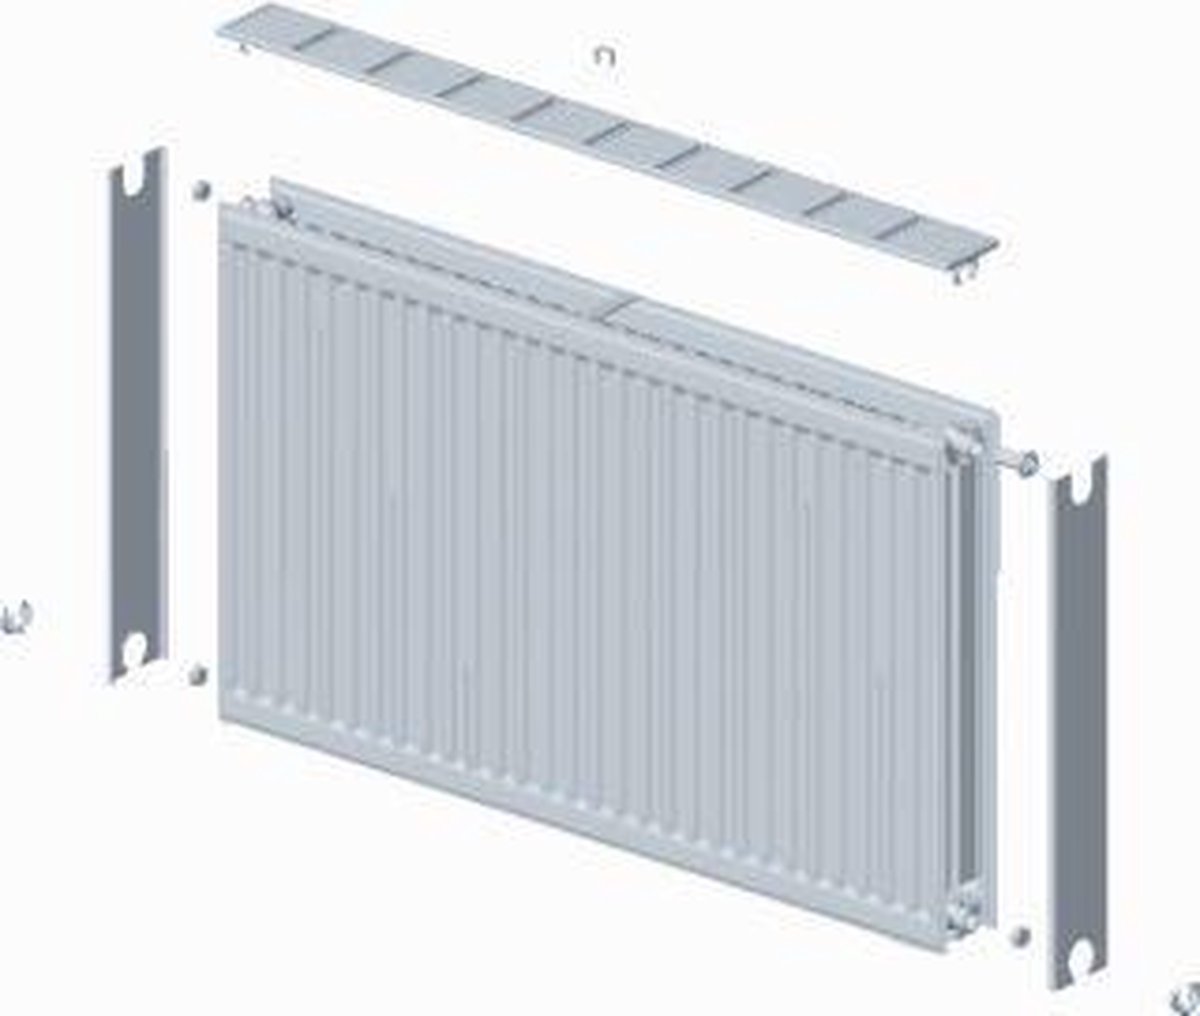 Stelrad paneelradiator Novello, staal, wit, (hxlxd) 900x1000x100mm, 22